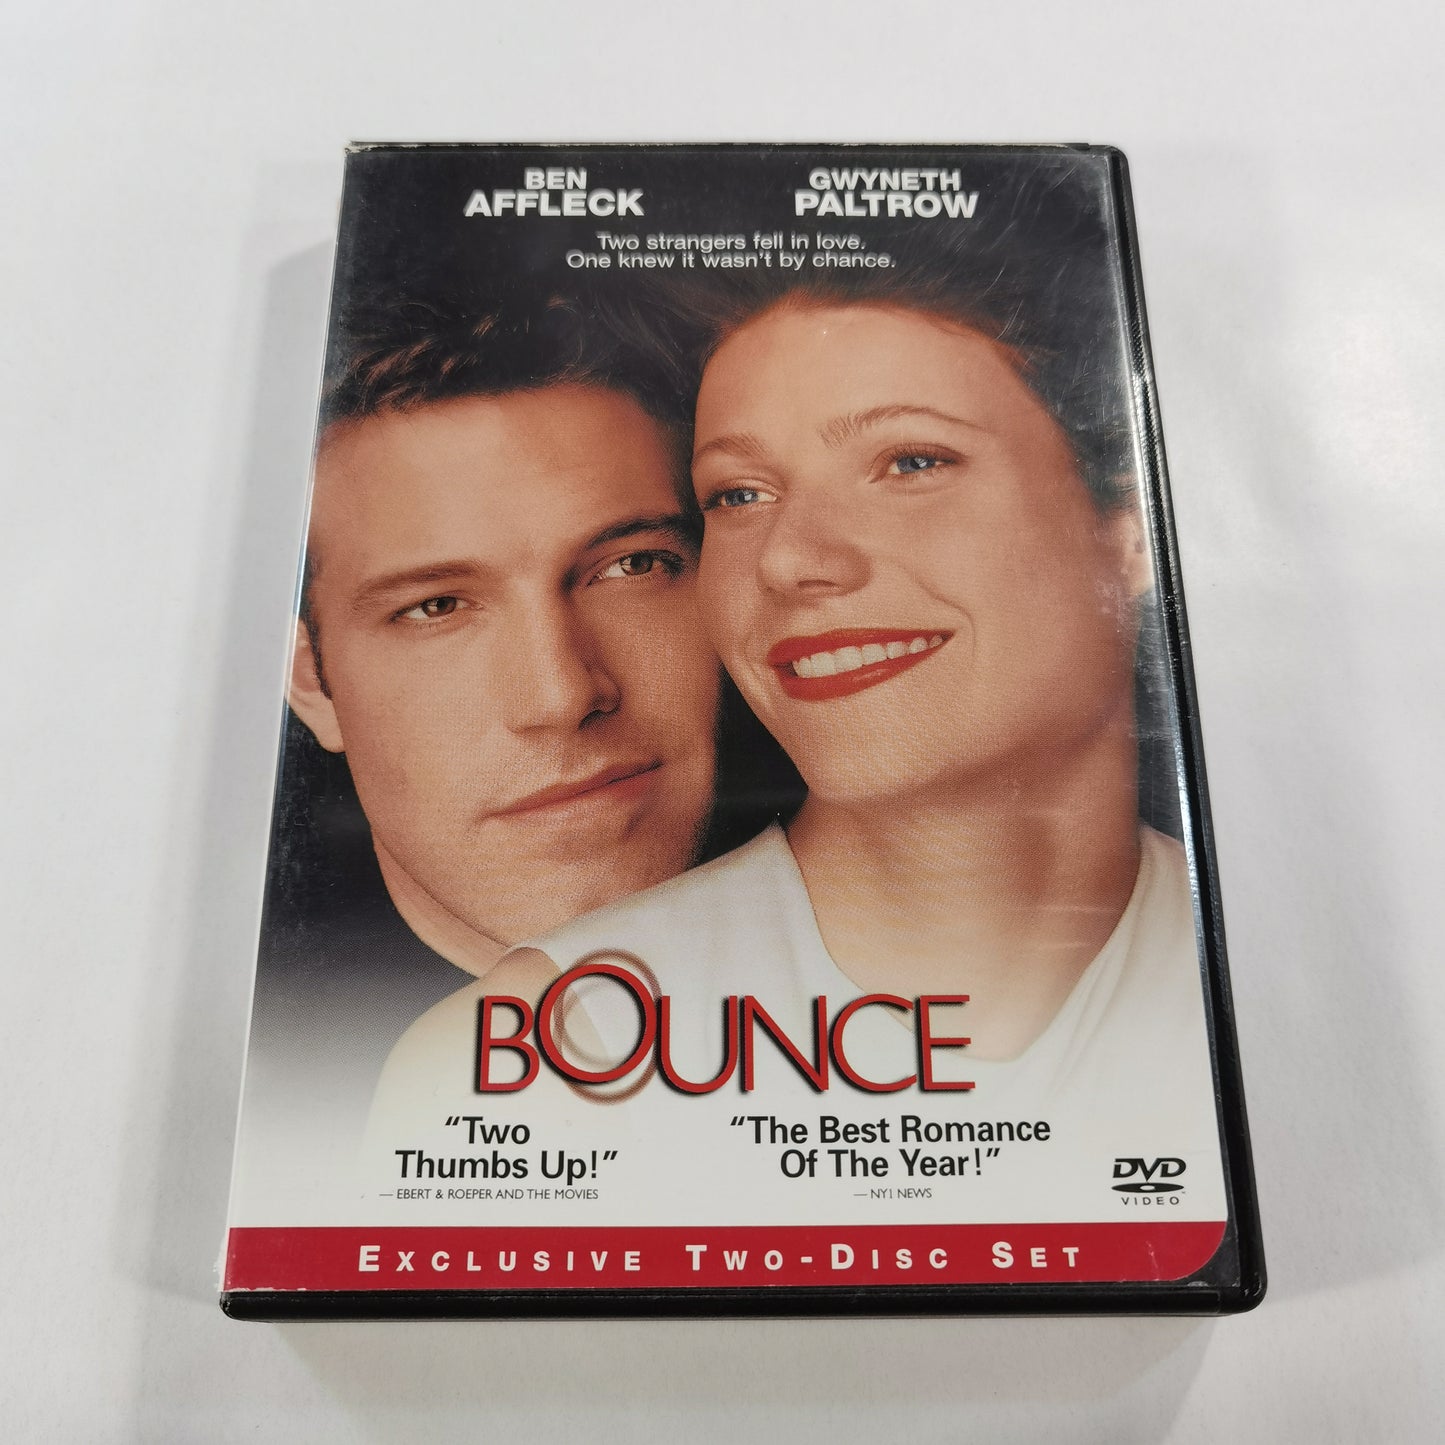 Bounce (2000) - DVD US 2-Disc Exclusive